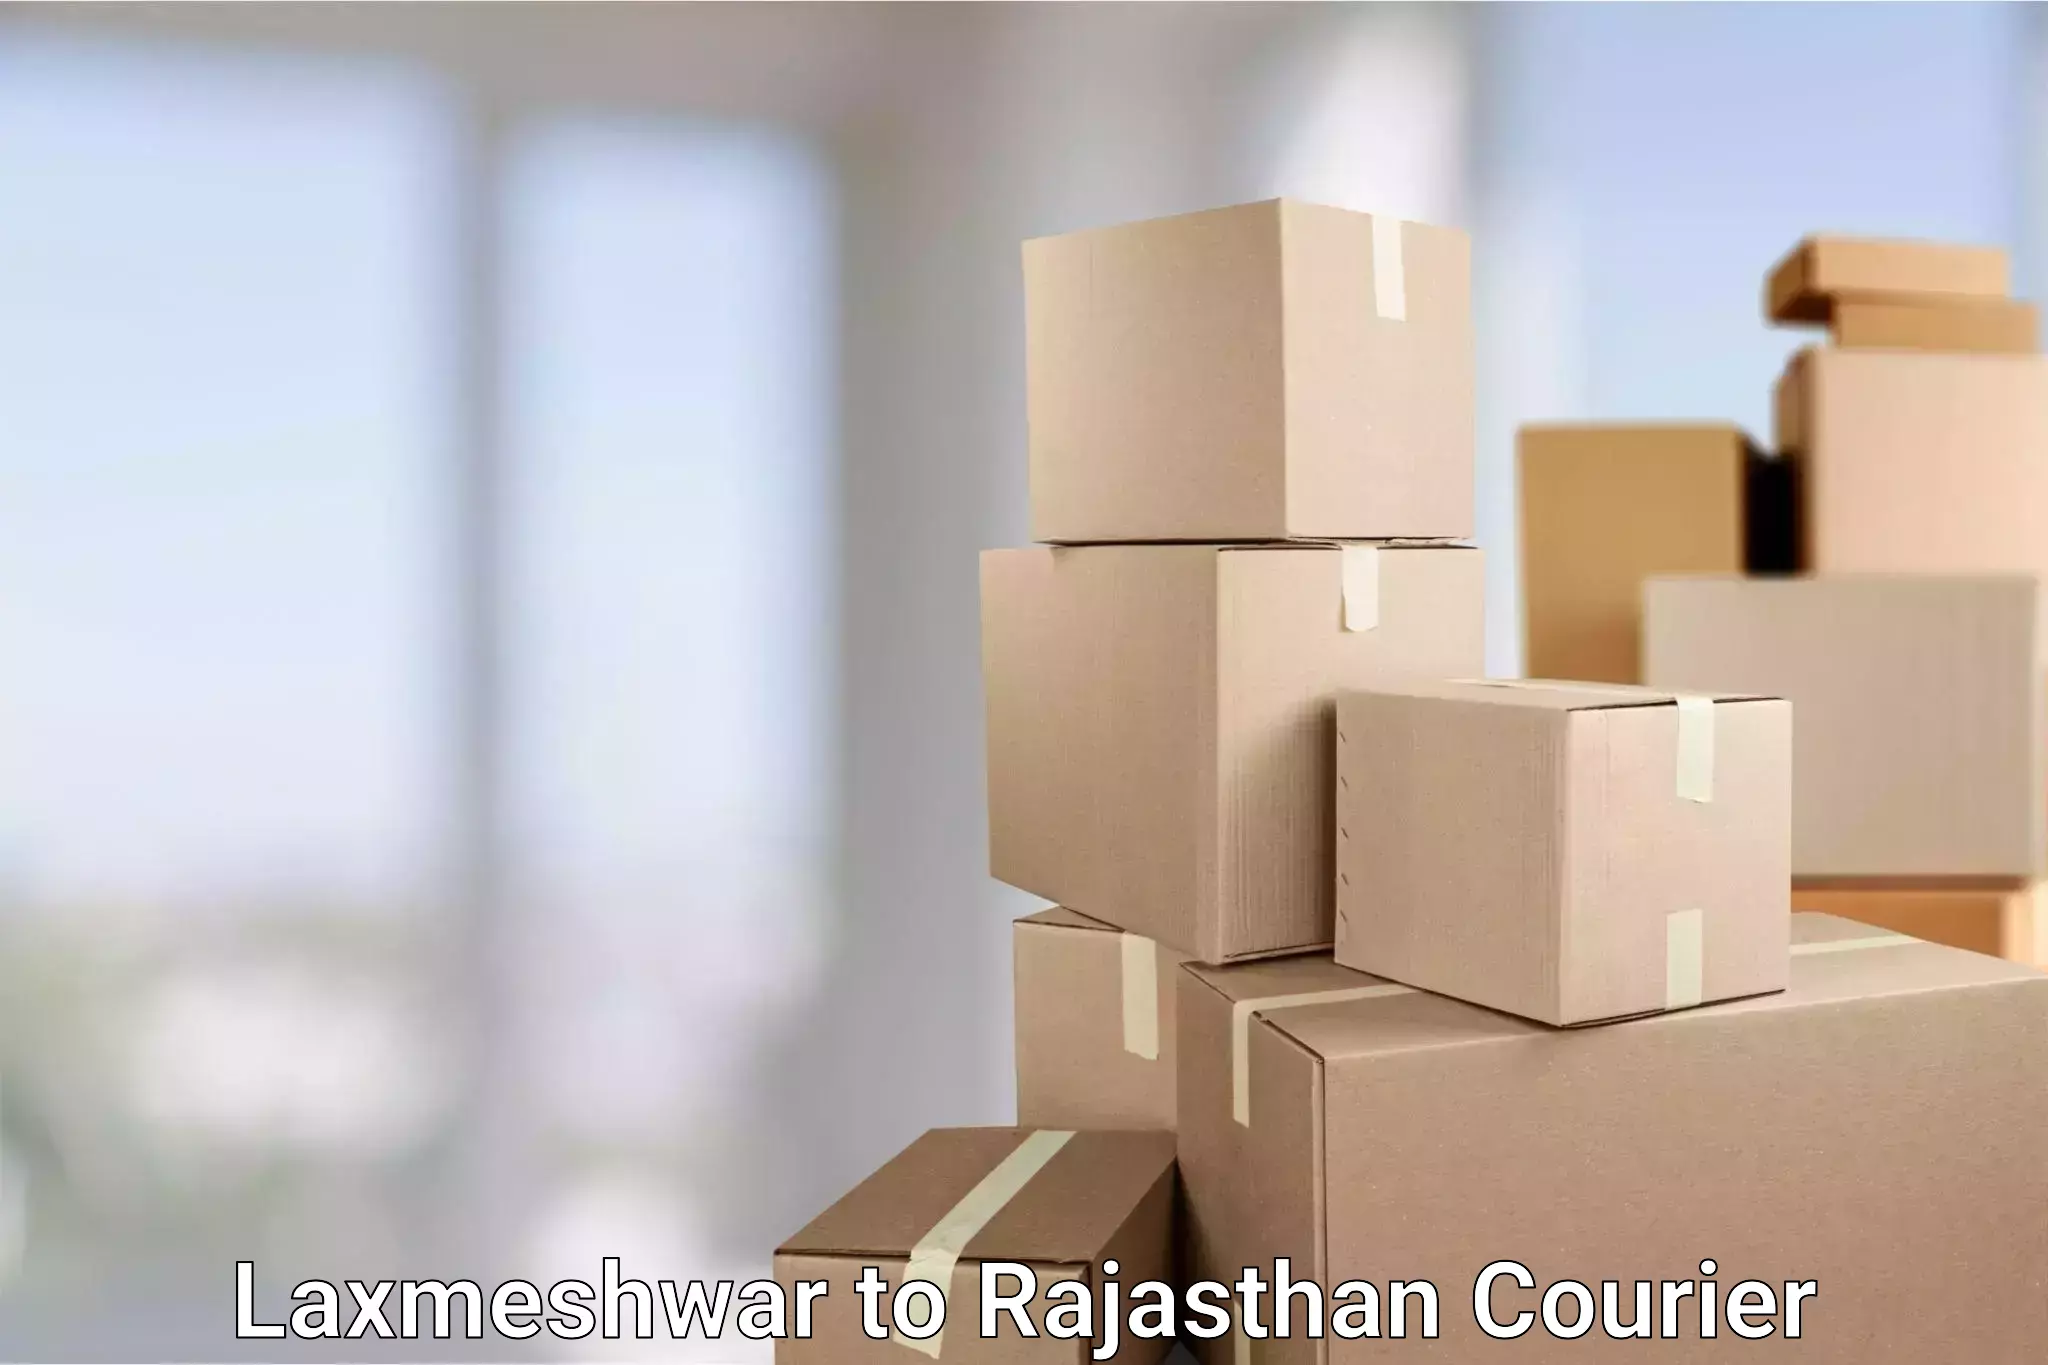 Rural area delivery in Laxmeshwar to Chittorgarh